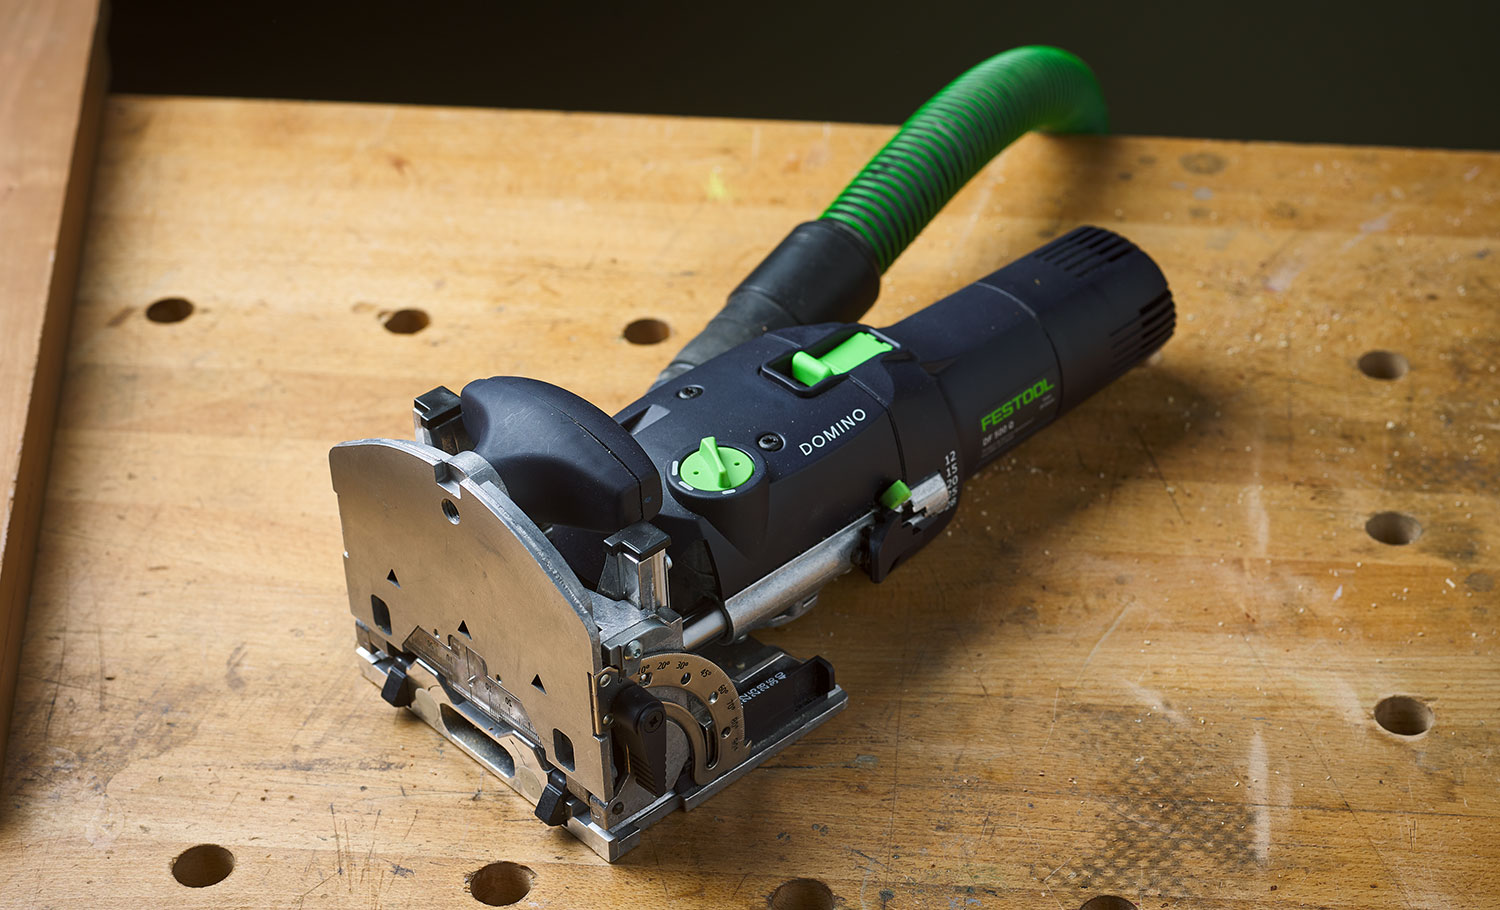 The Festool Domino DF500 sitting on a workbench top.